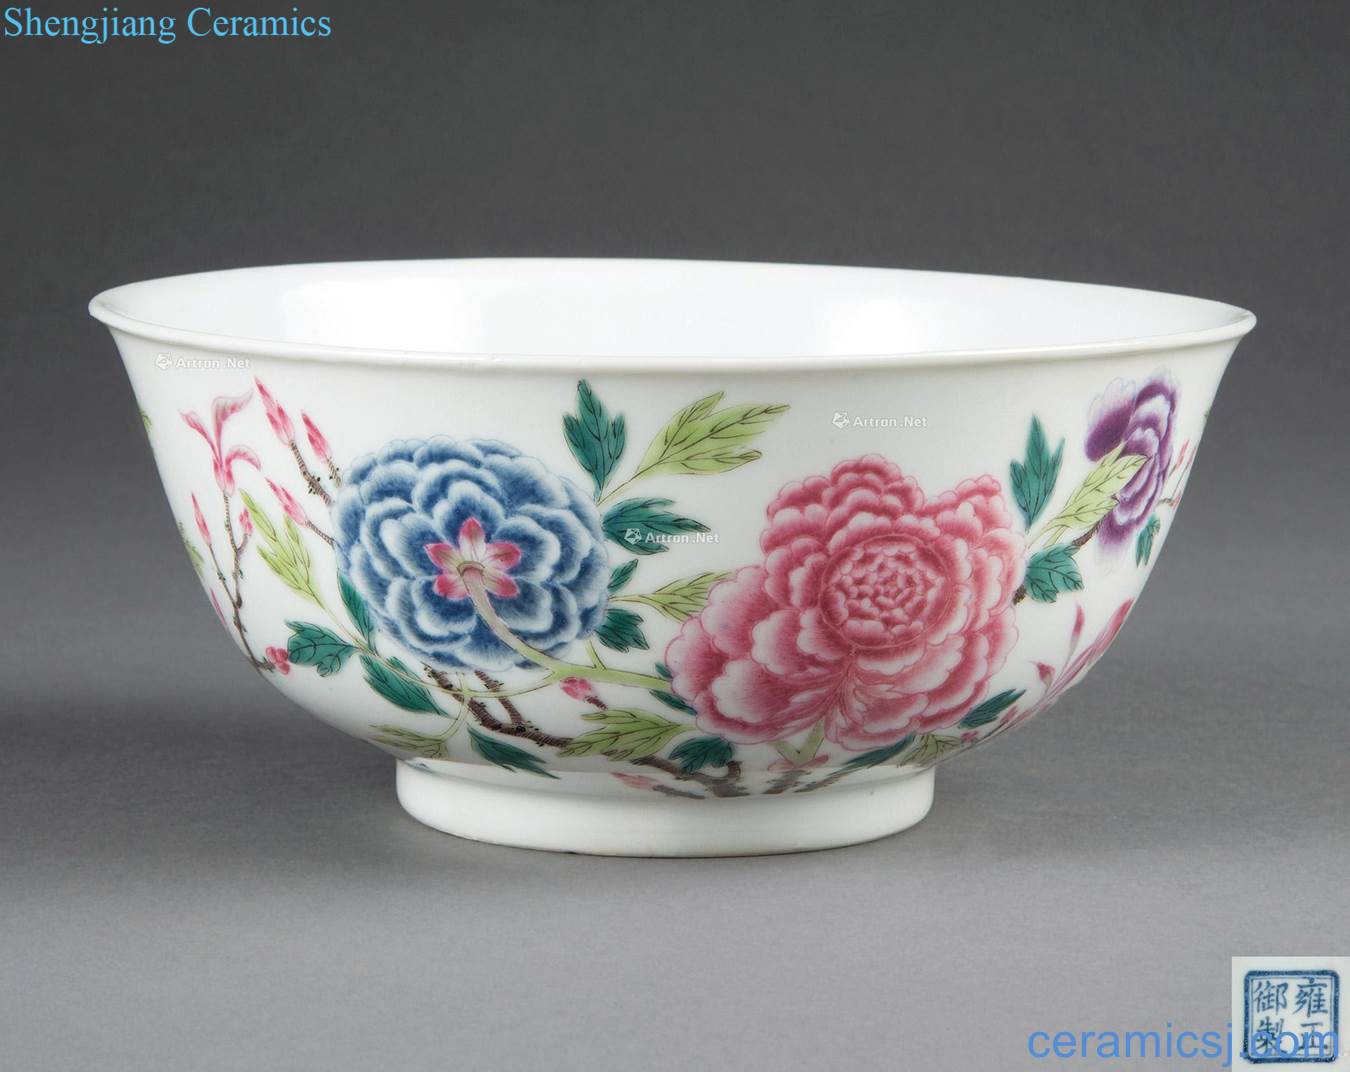 Qing yongzheng drive pastel riches and honor peony green-splashed bowls